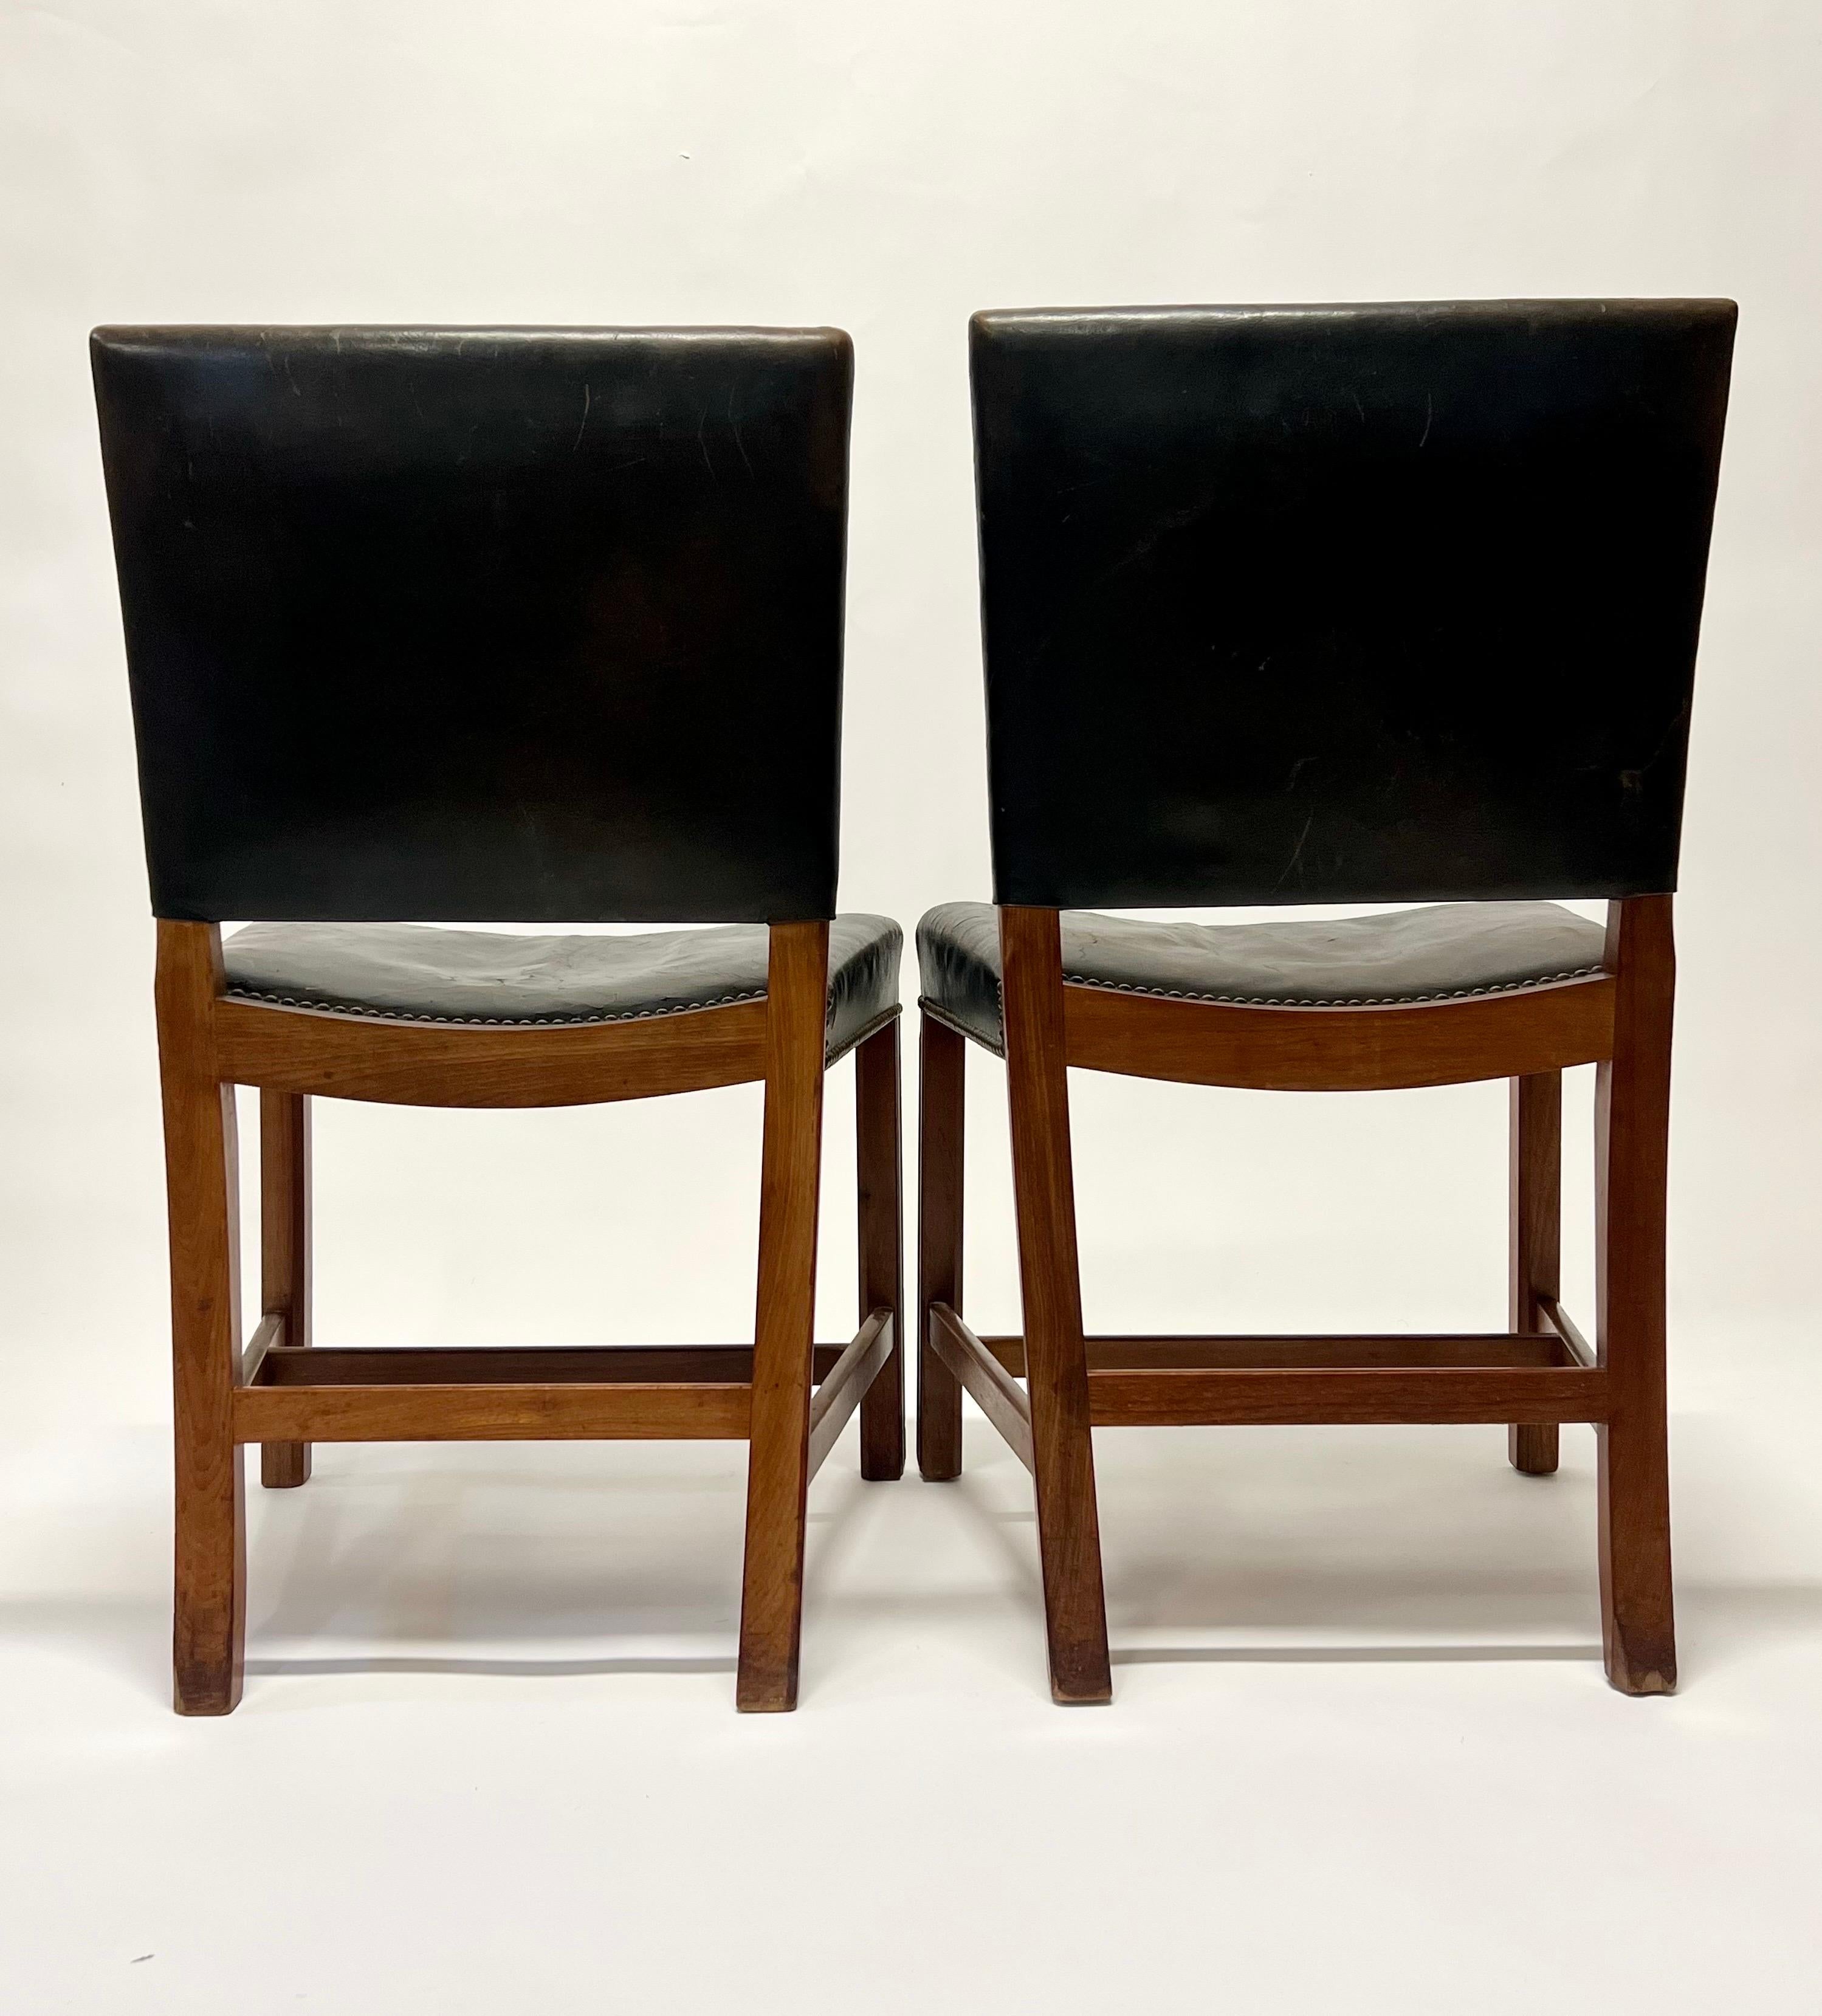 Mid-20th Century Early Kaare Klint Red Chairs in Cuban Mahogany, circa 1930s For Sale